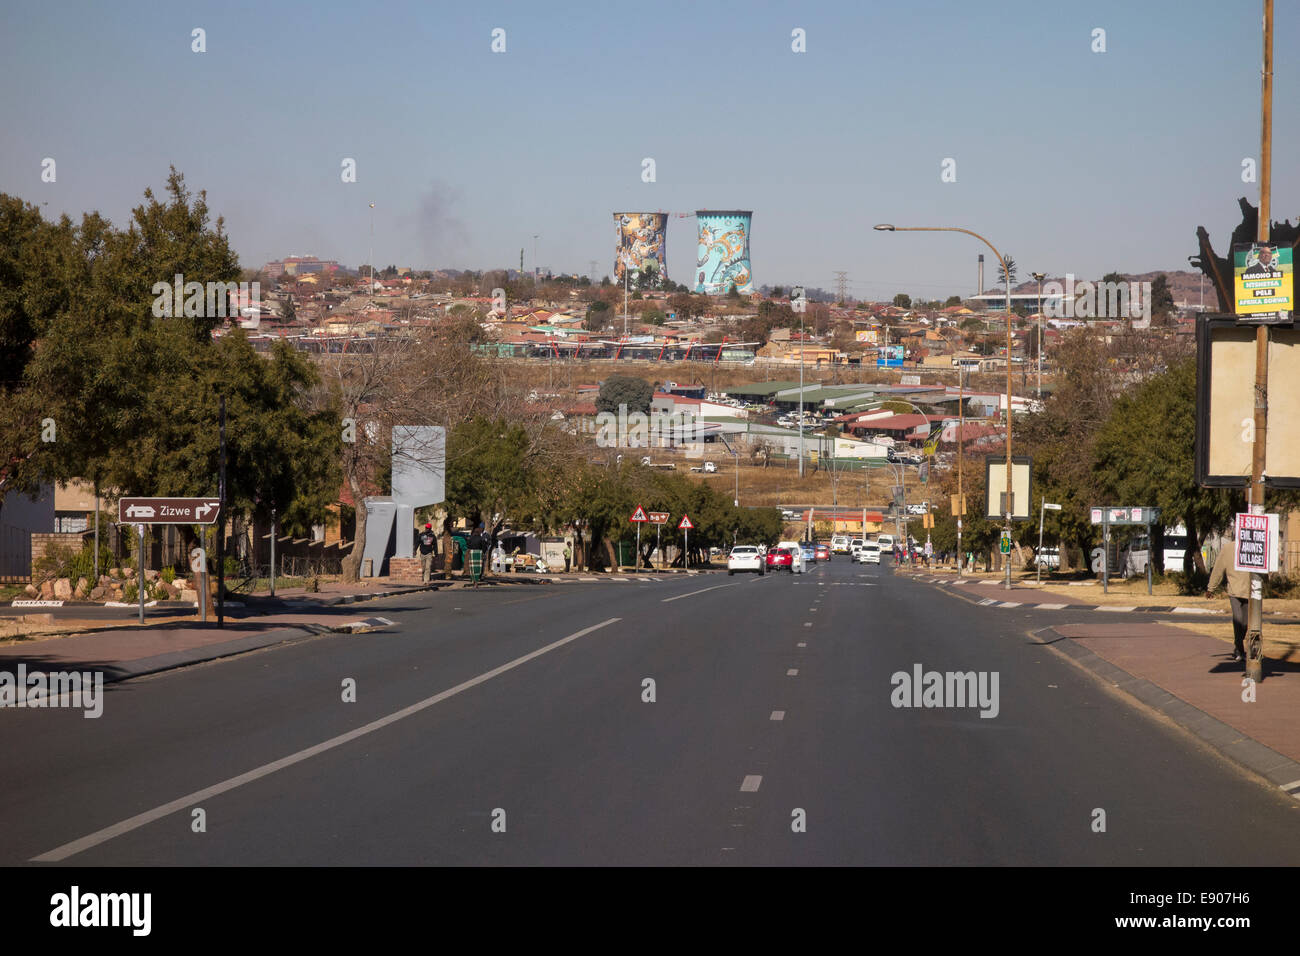 SOWETO, JOHANNESBURG, SOUTH AFRICA - Street scene, with Orlando Cooling Towers in distance. Stock Photo